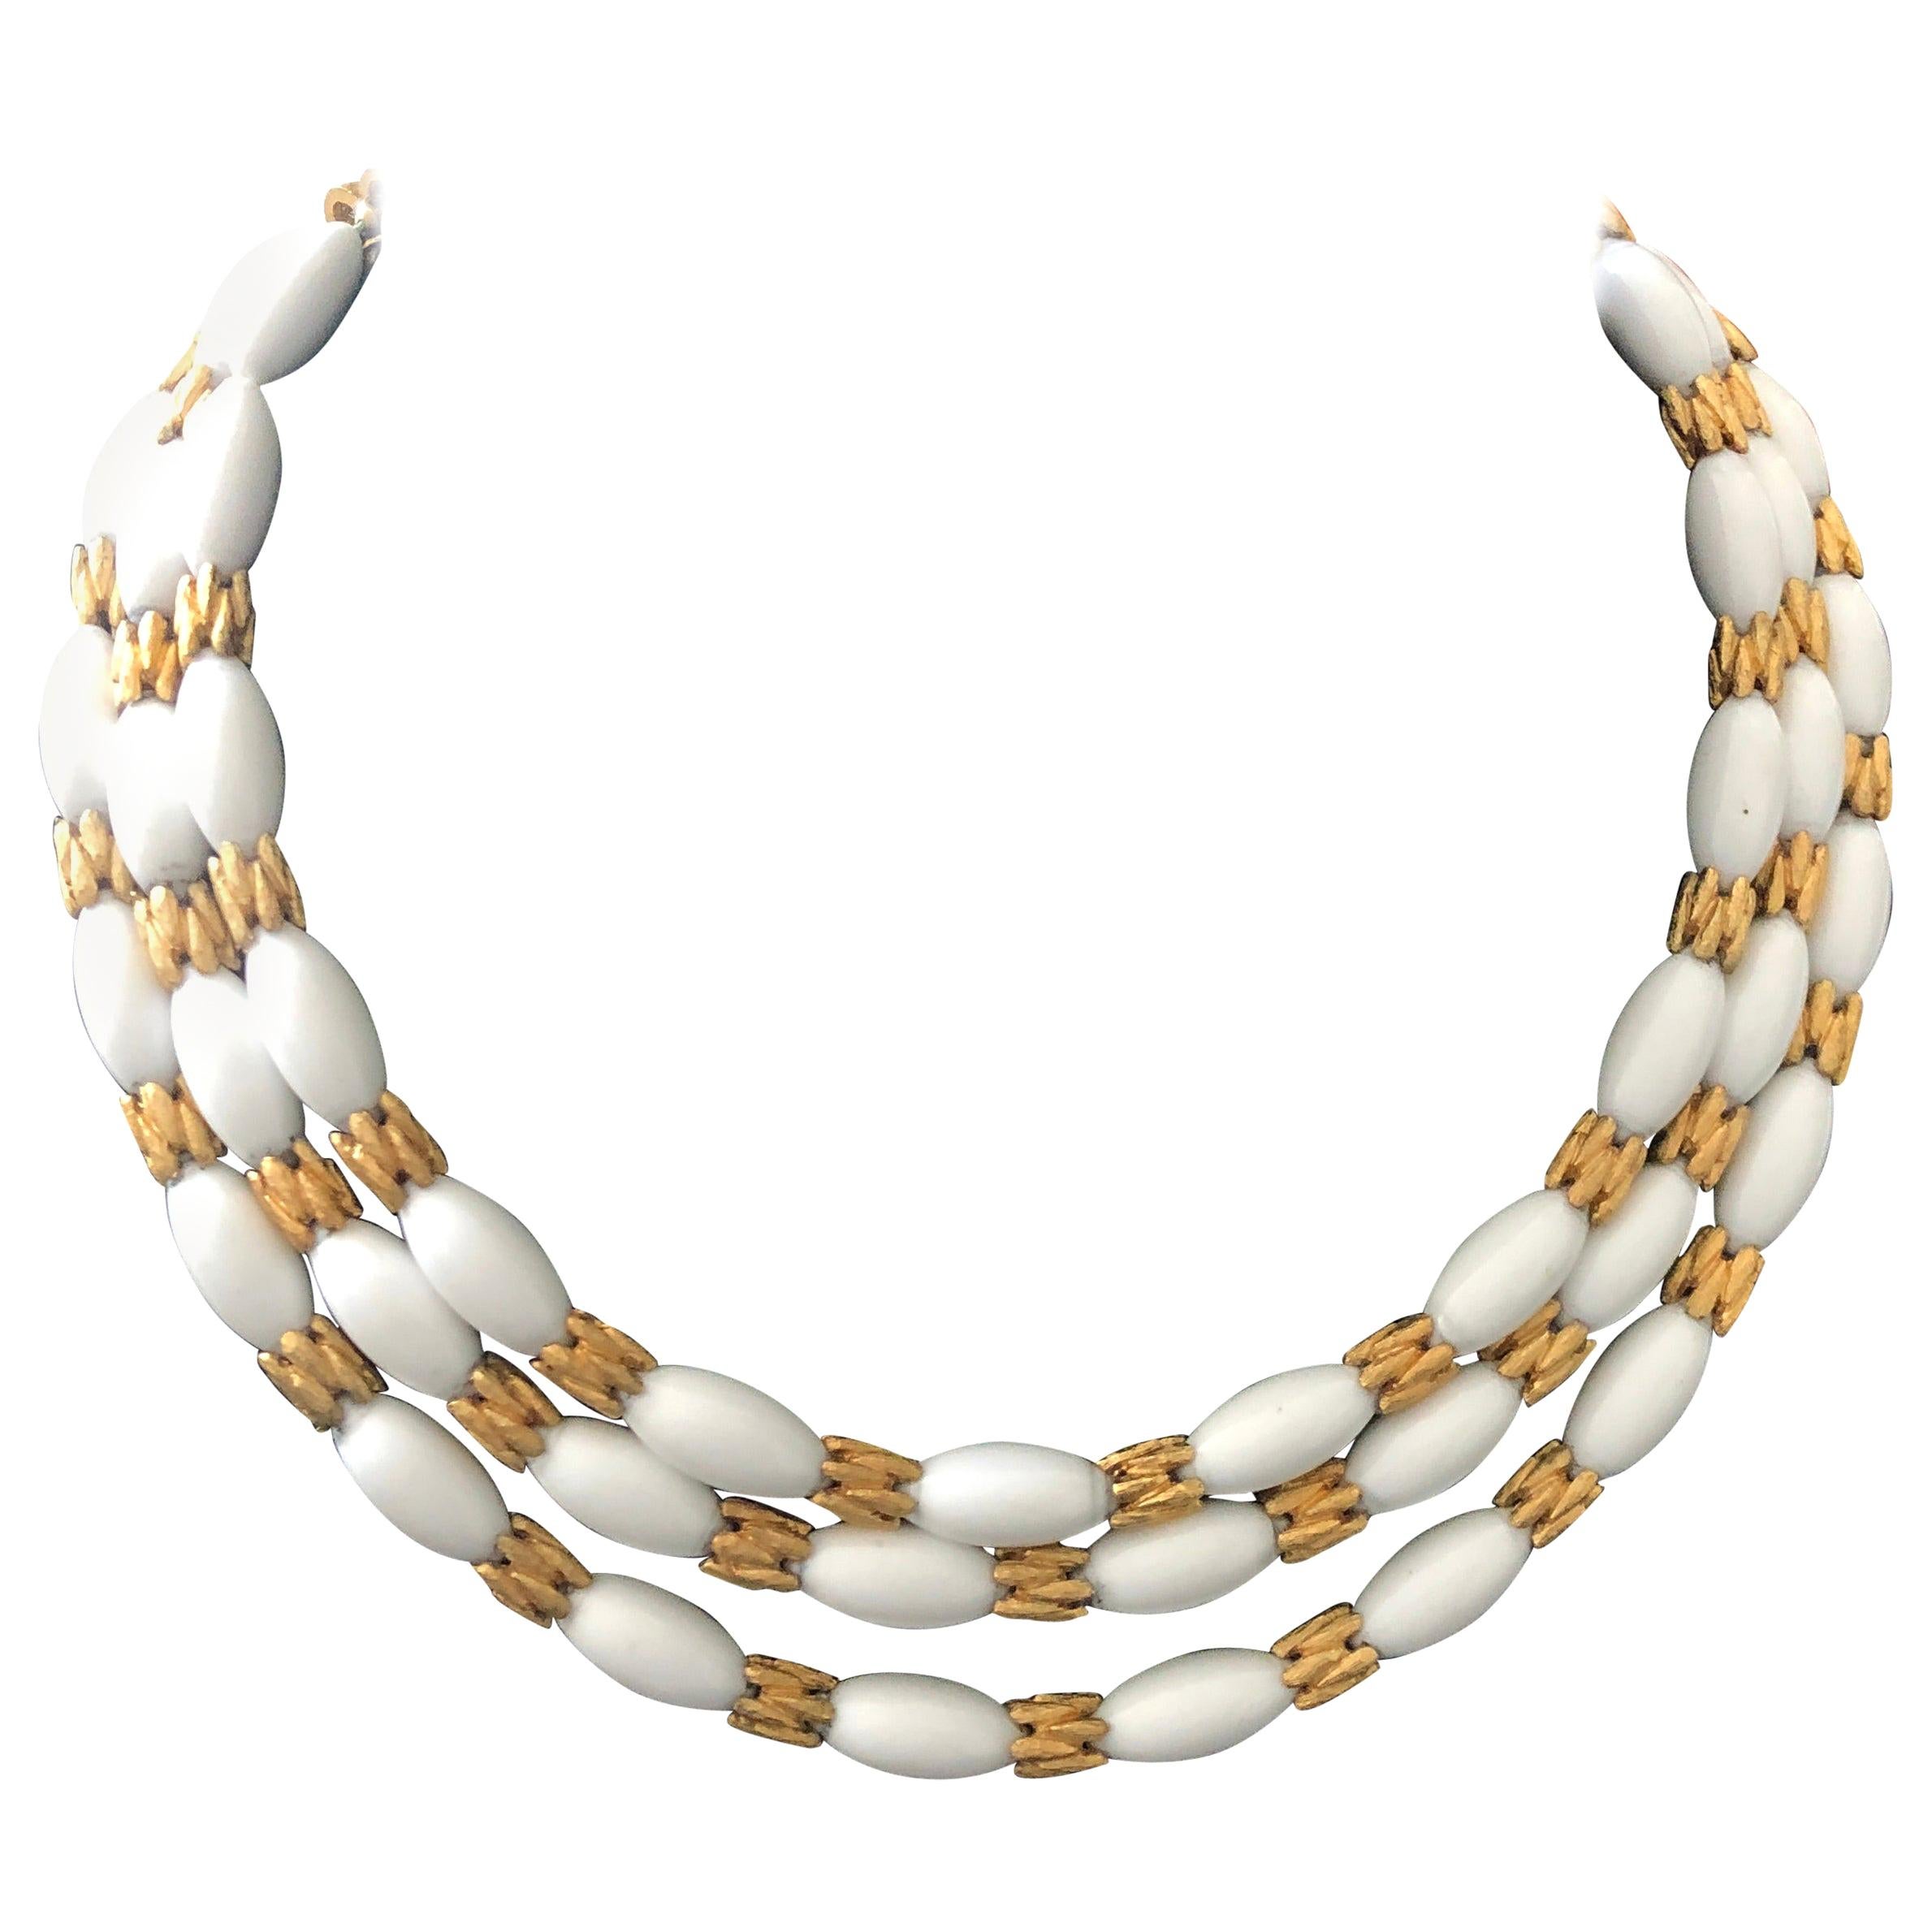 A White Lucite and Gilded Metal Choker Necklace by Trifari circa 1970